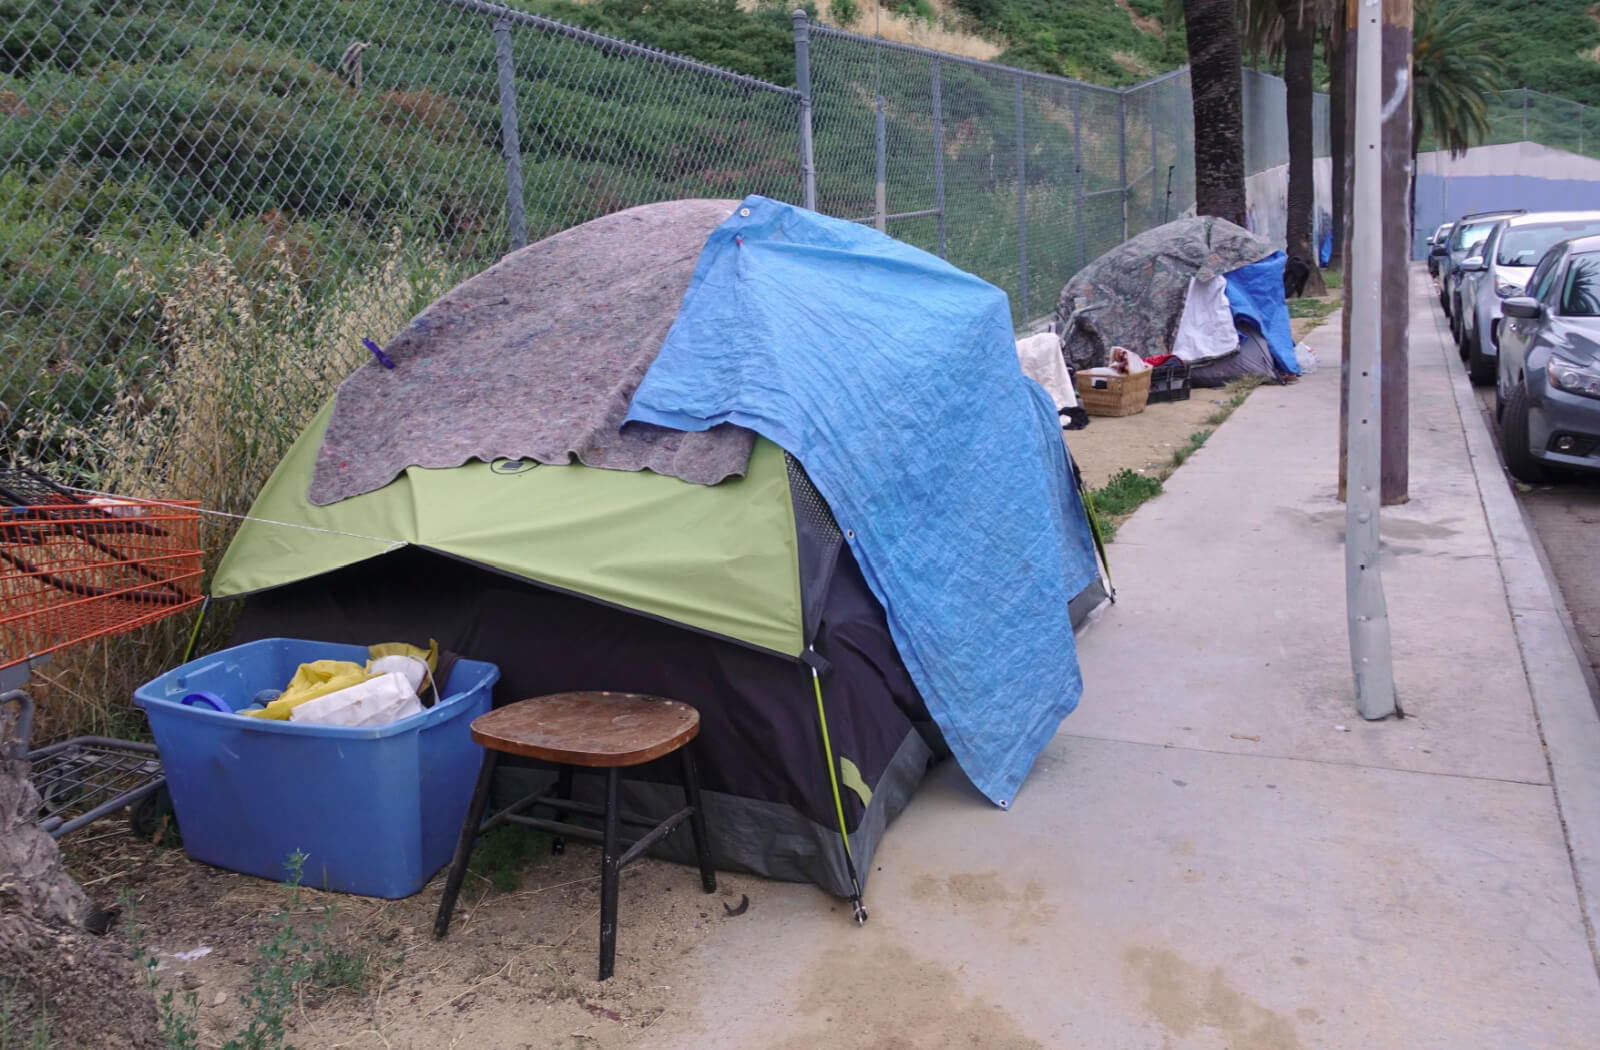 Green and blue colored tents are set up on the side of the road as temporary shelters for homeless individuals.